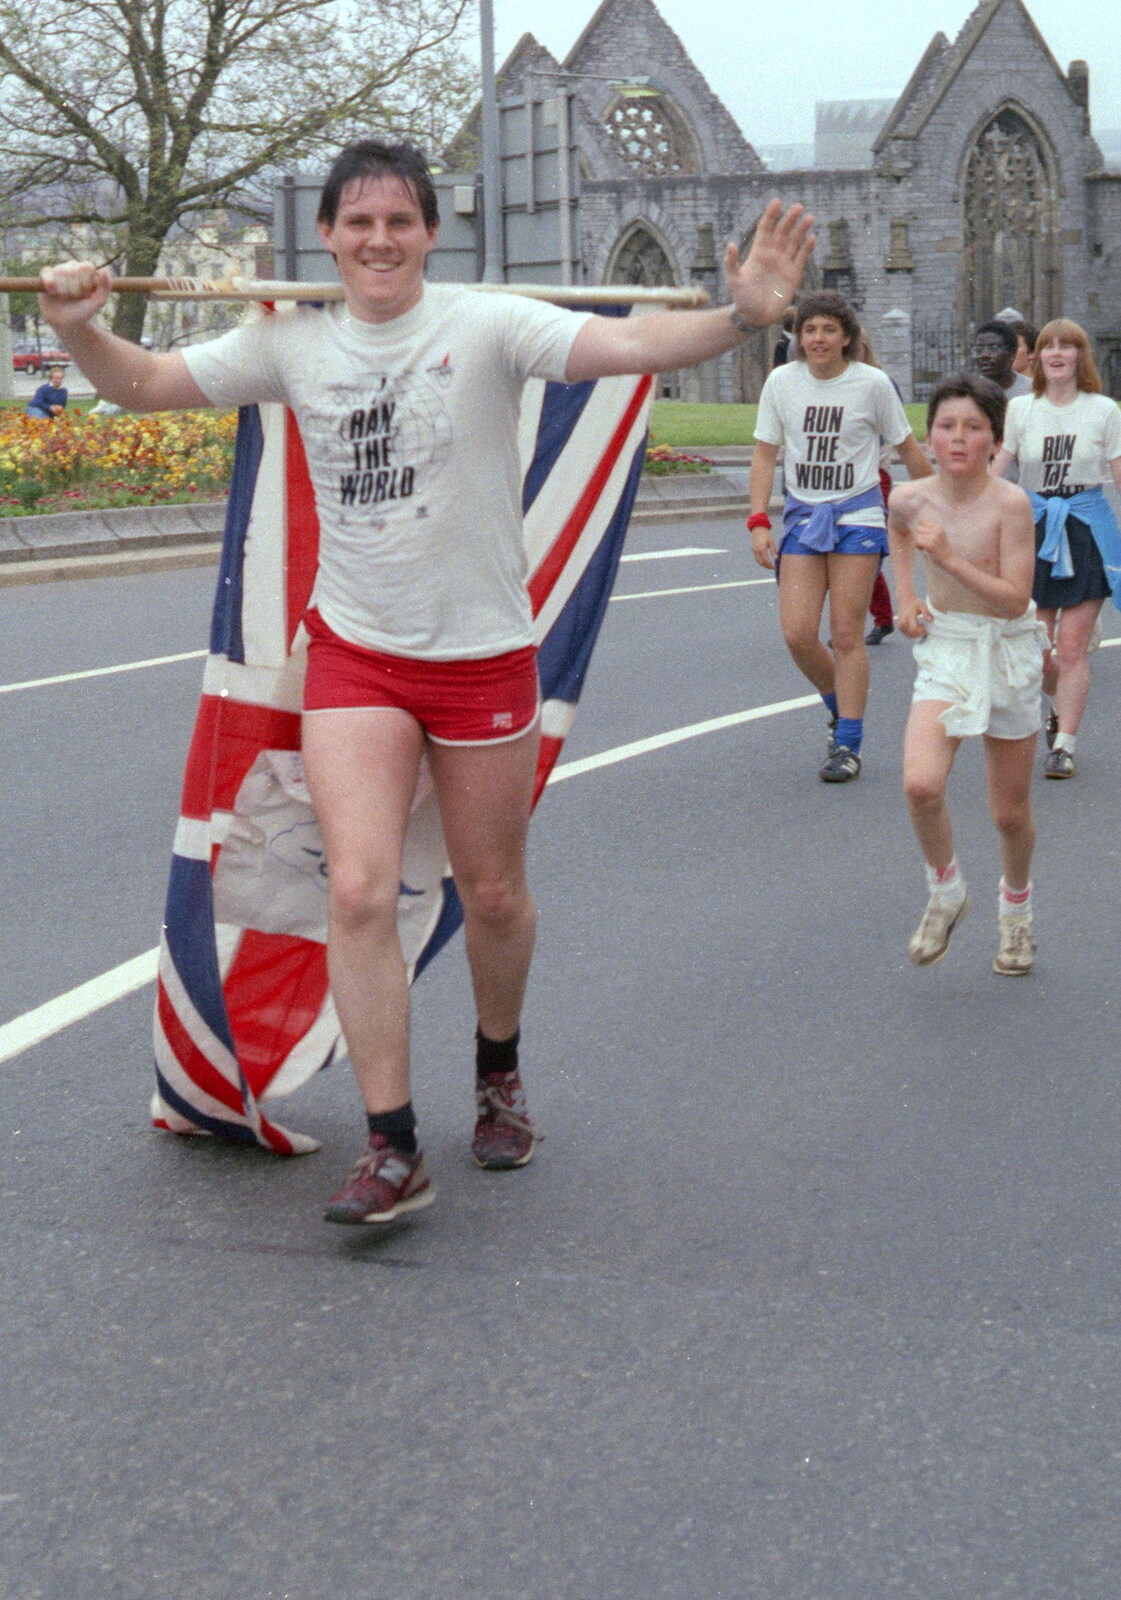 A runner hauls around a Union Flag from Uni: Sport Aid - Run The World, Plymouth, Devon - 25th May 1986